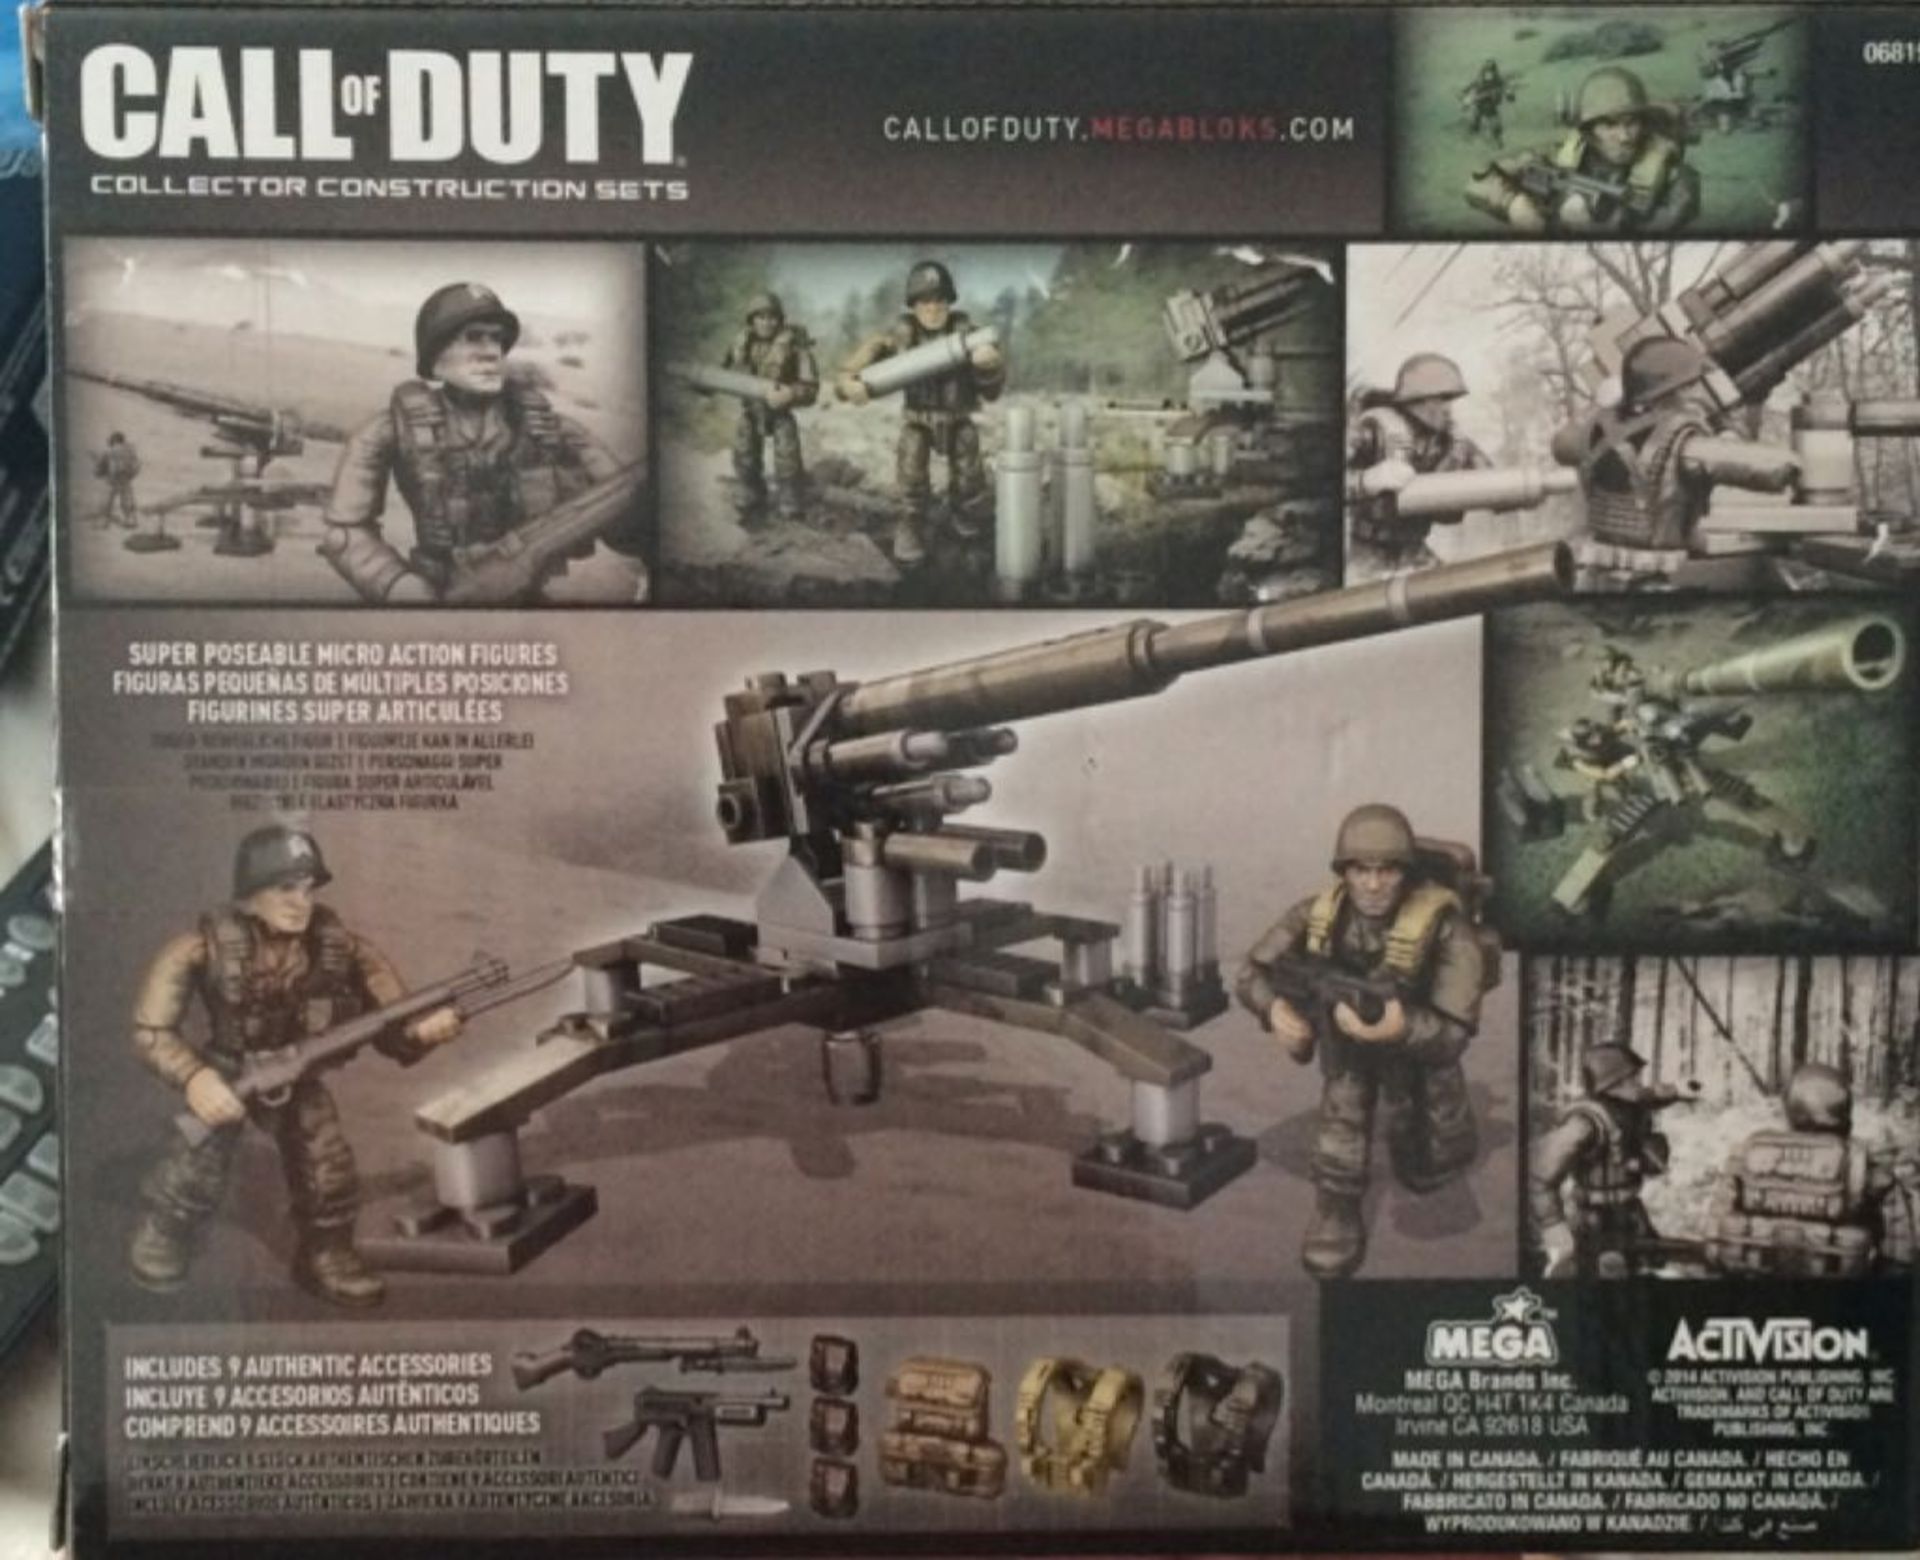 V Brand New Call Of Duty Mega Blocks Collector Series Attack Turrent eBay Price £16.99 X 2 YOUR - Image 2 of 2